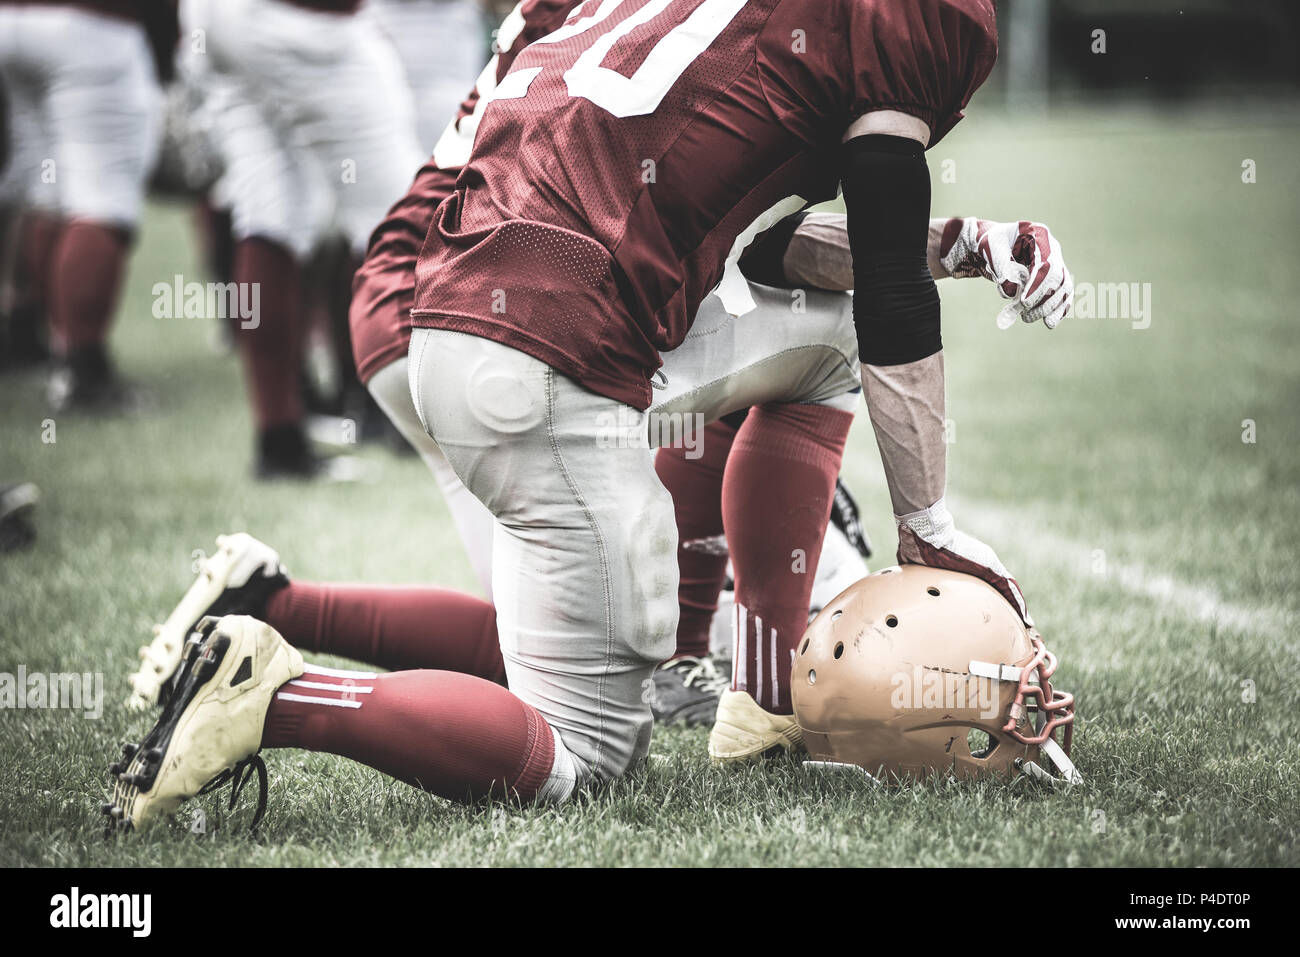 Toned image of an American Football player in action Stock Photo